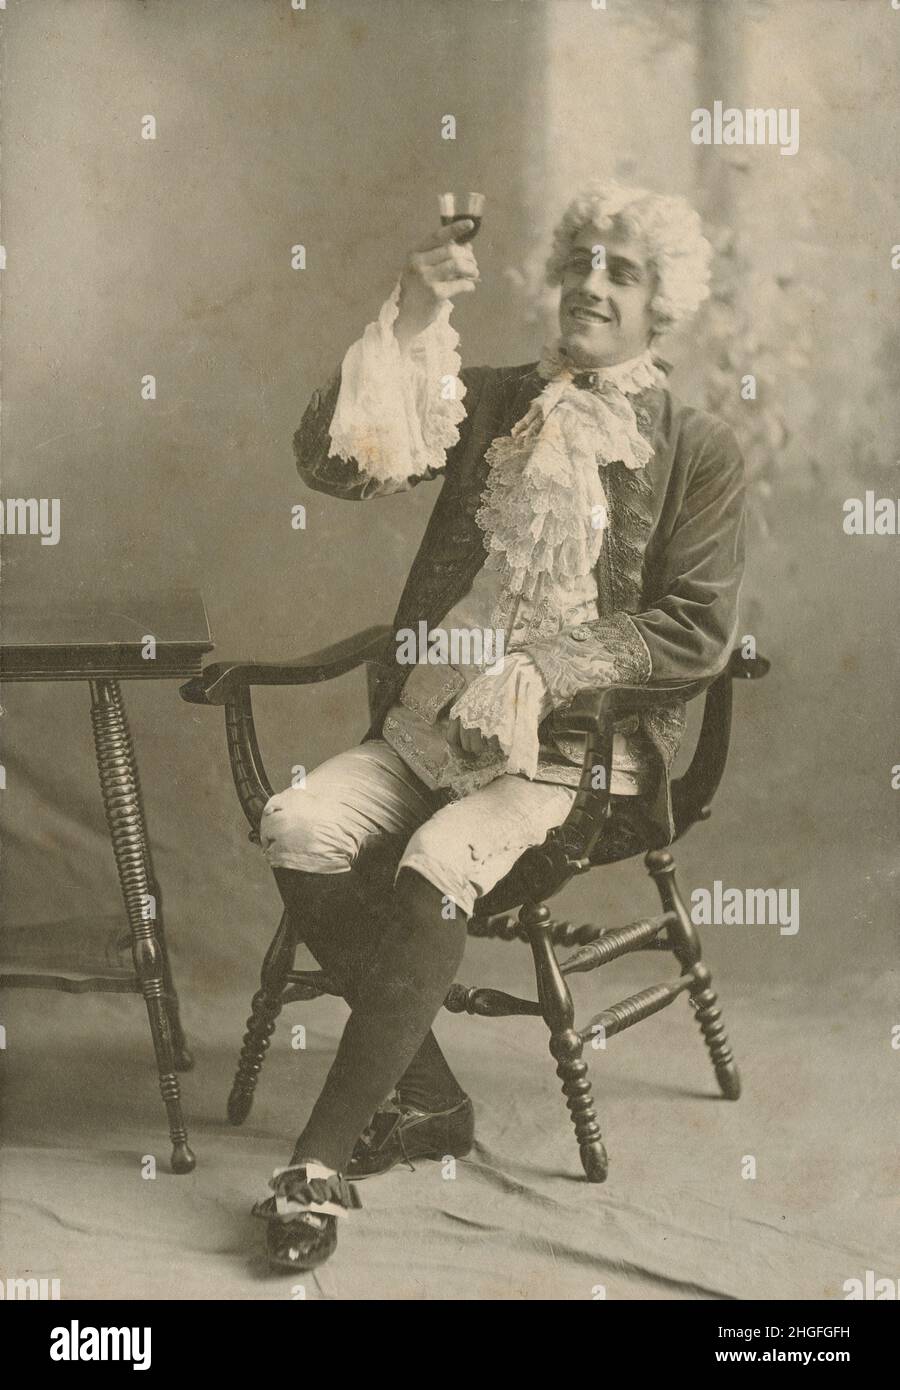 Antique circa 1910 photograph, man dressed in period 18th century fashion with breeches, stockings, lace cravat, wife, cuffs, and shoe buckles. SOURCE: ORIGINAL PHOTOGRAPH Stock Photo